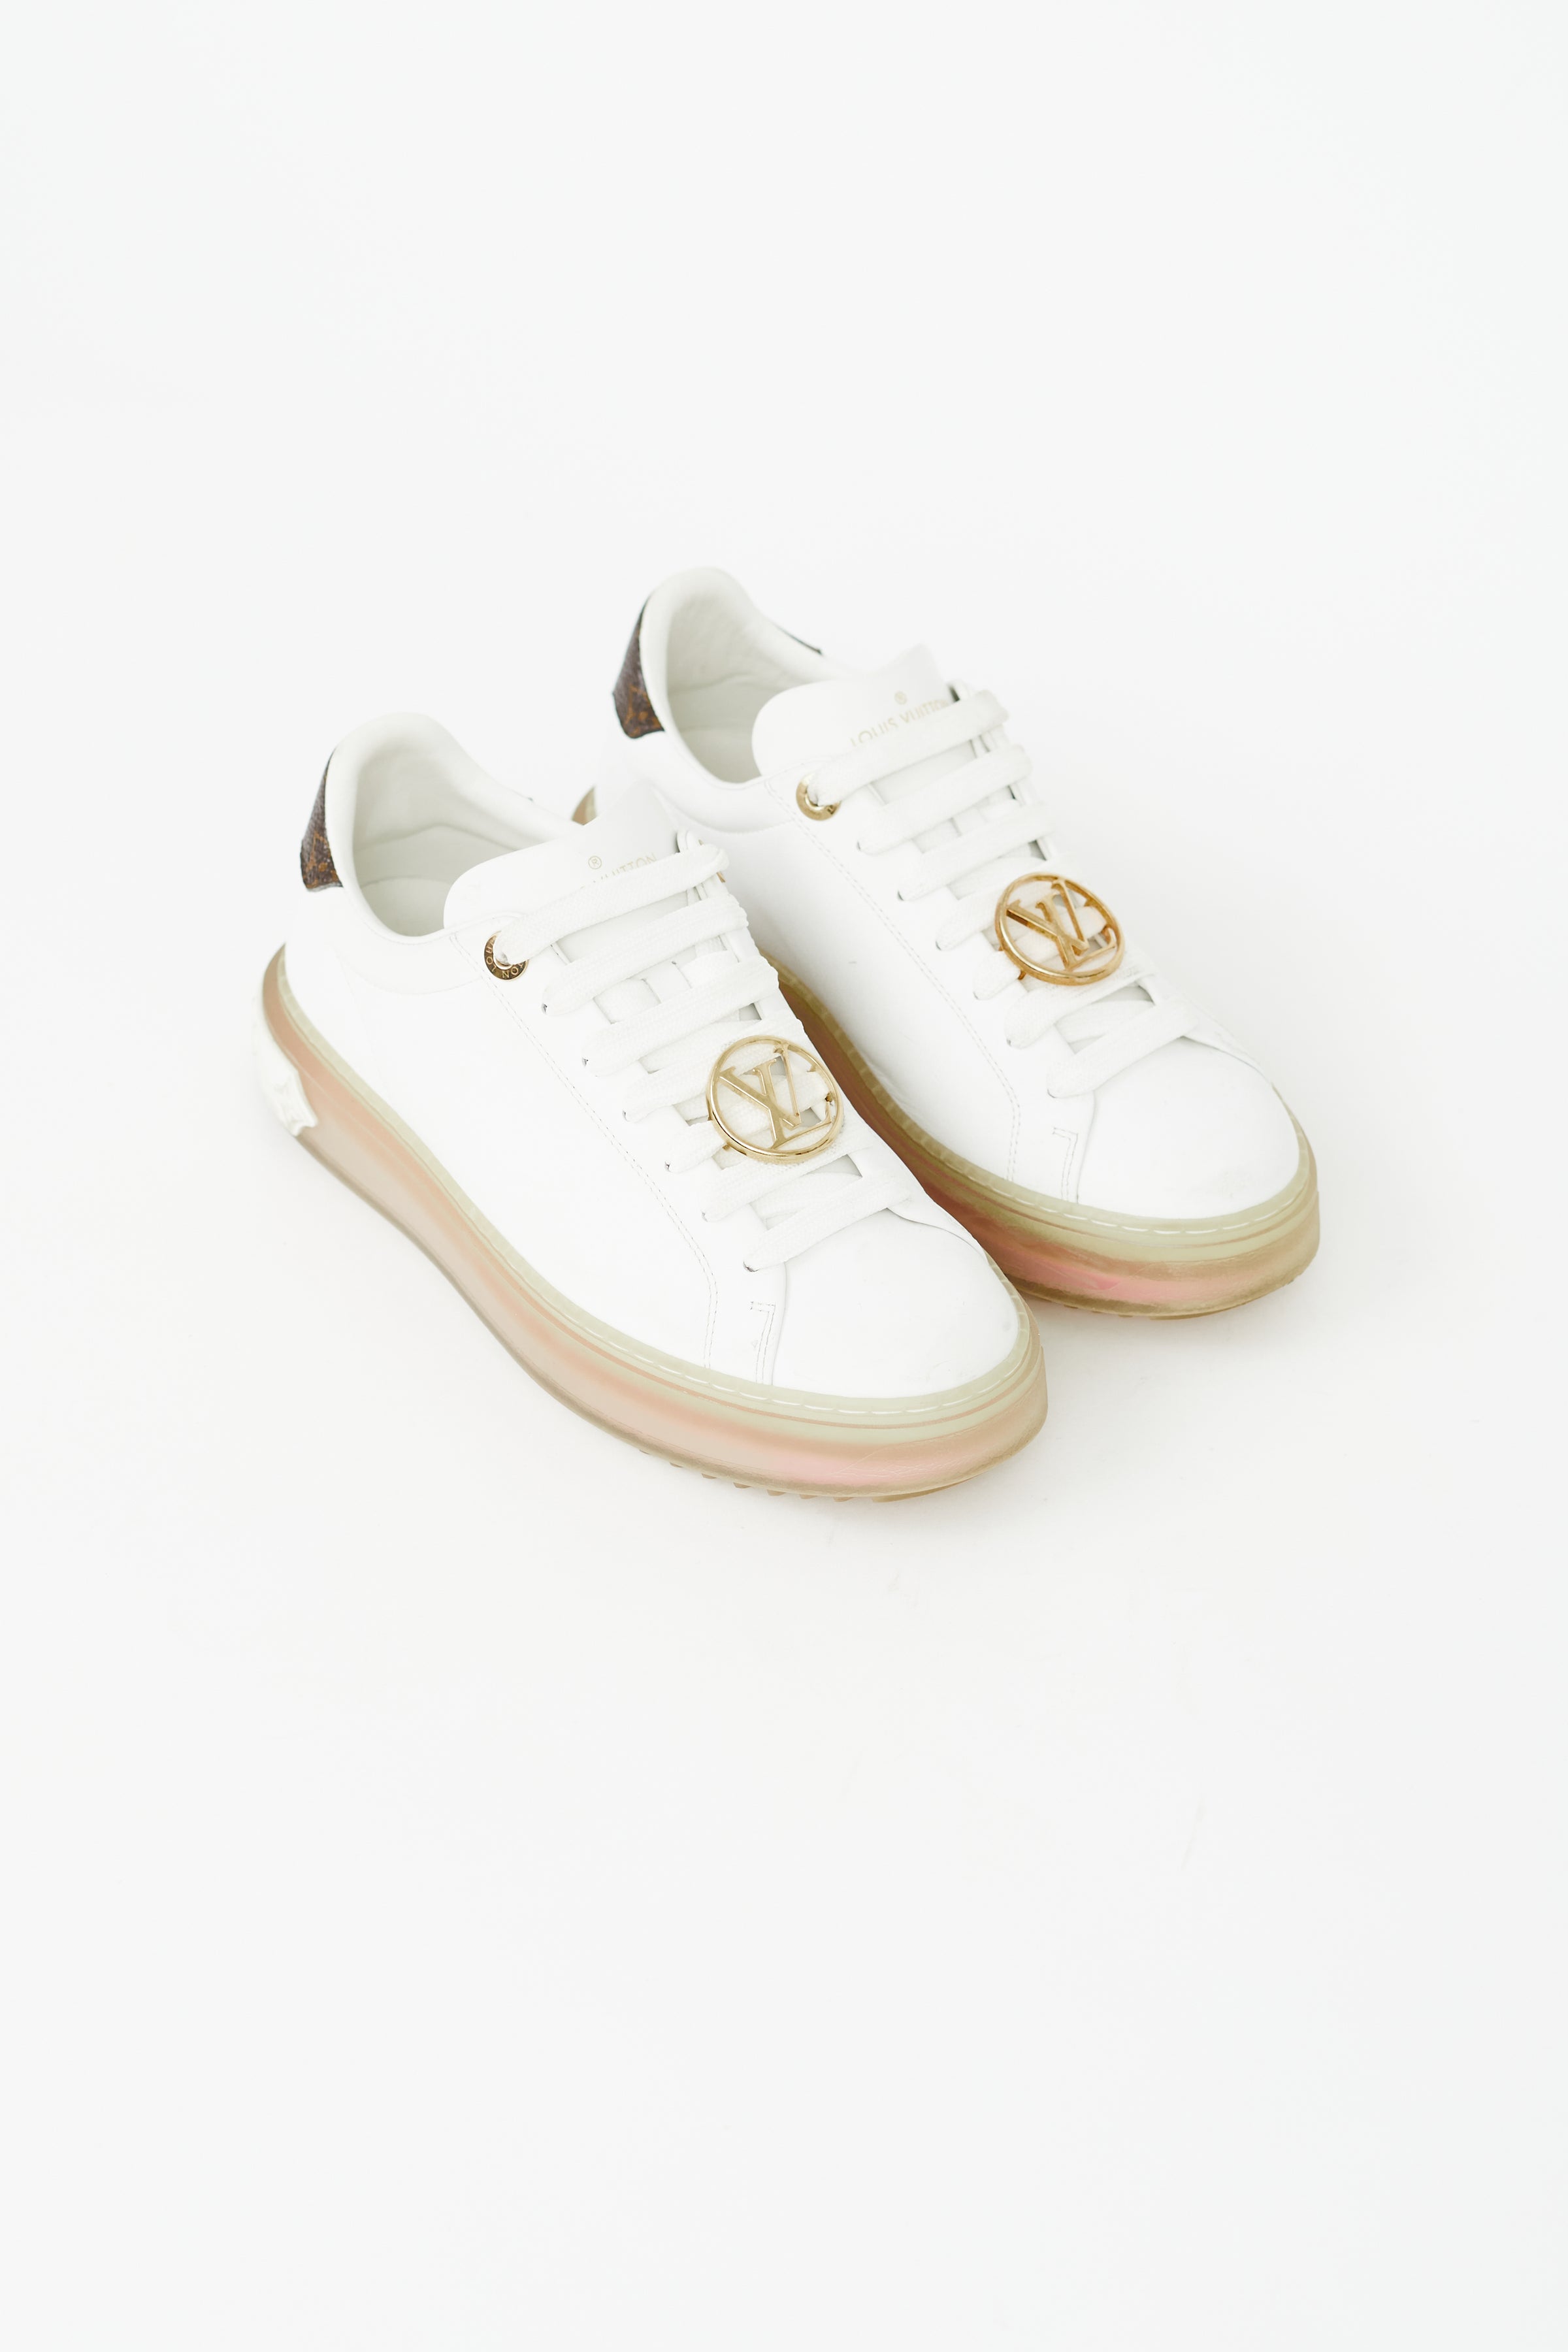 Louis Vuitton Bicolor Monogram Embossed Time Out Sneaker 37 – The Closet